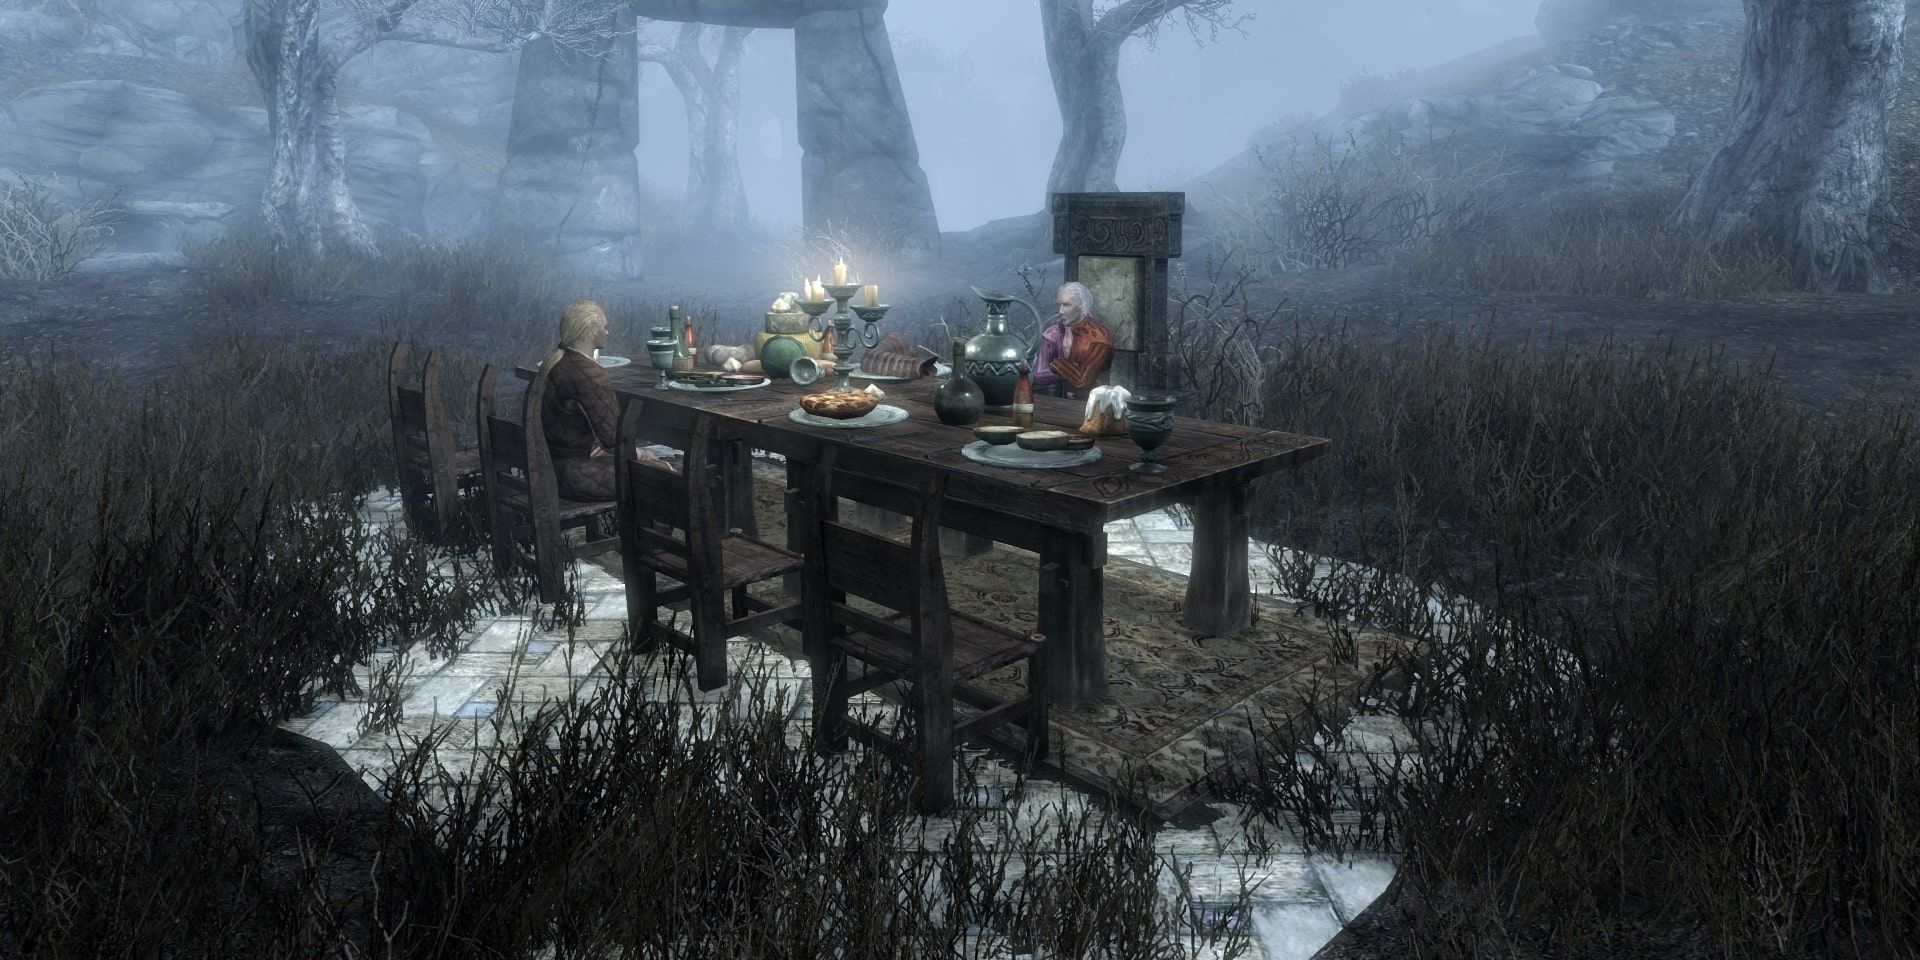 The tea party being held by Sheogorath in Skyrim.